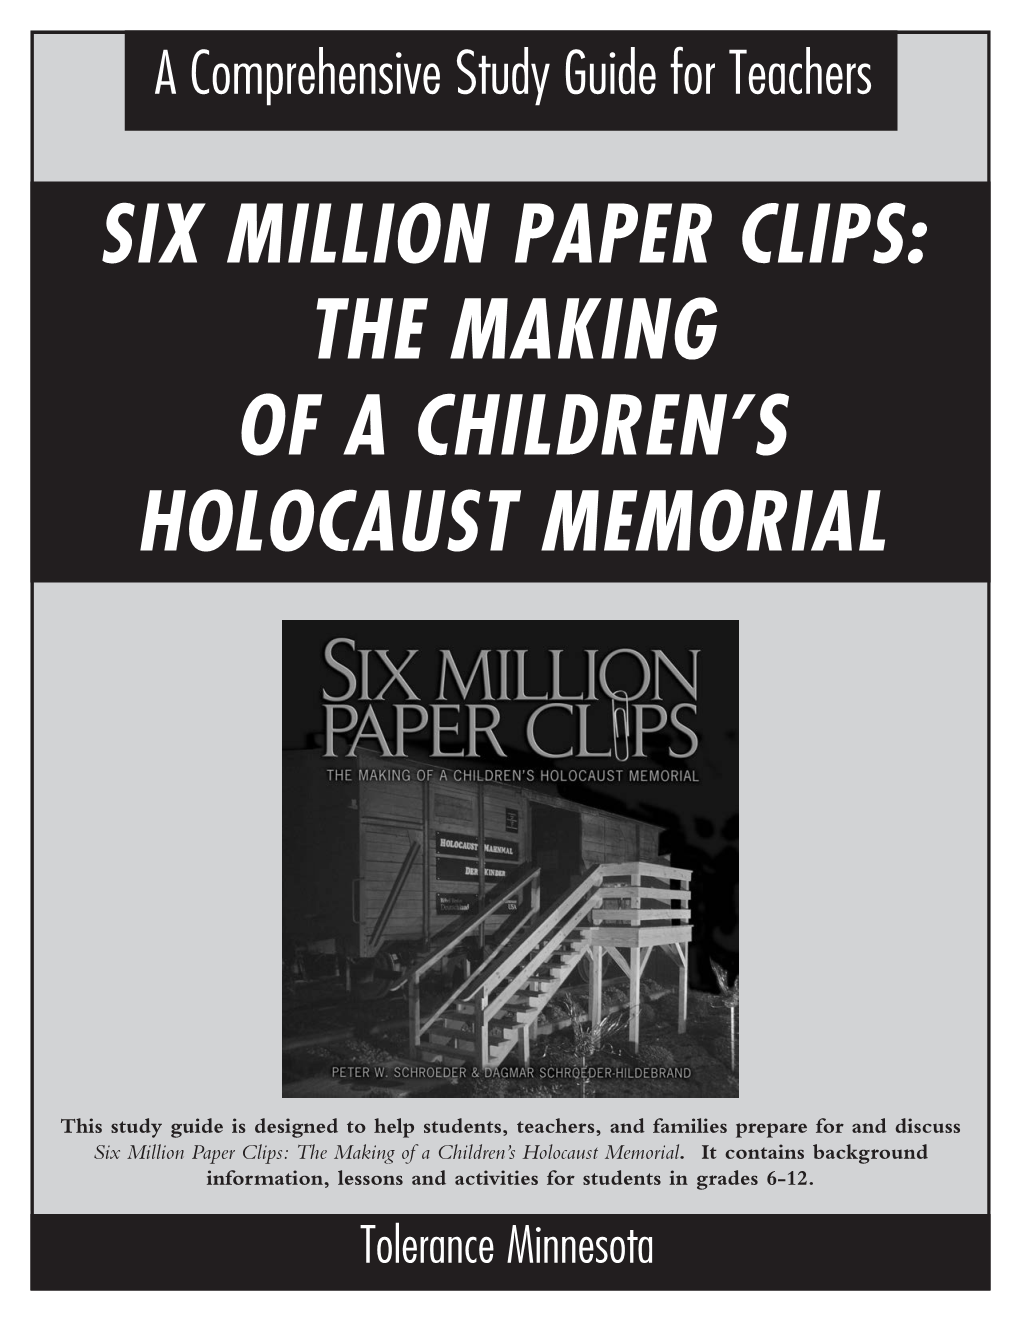 The Making of a Children's Holocaust Memorial